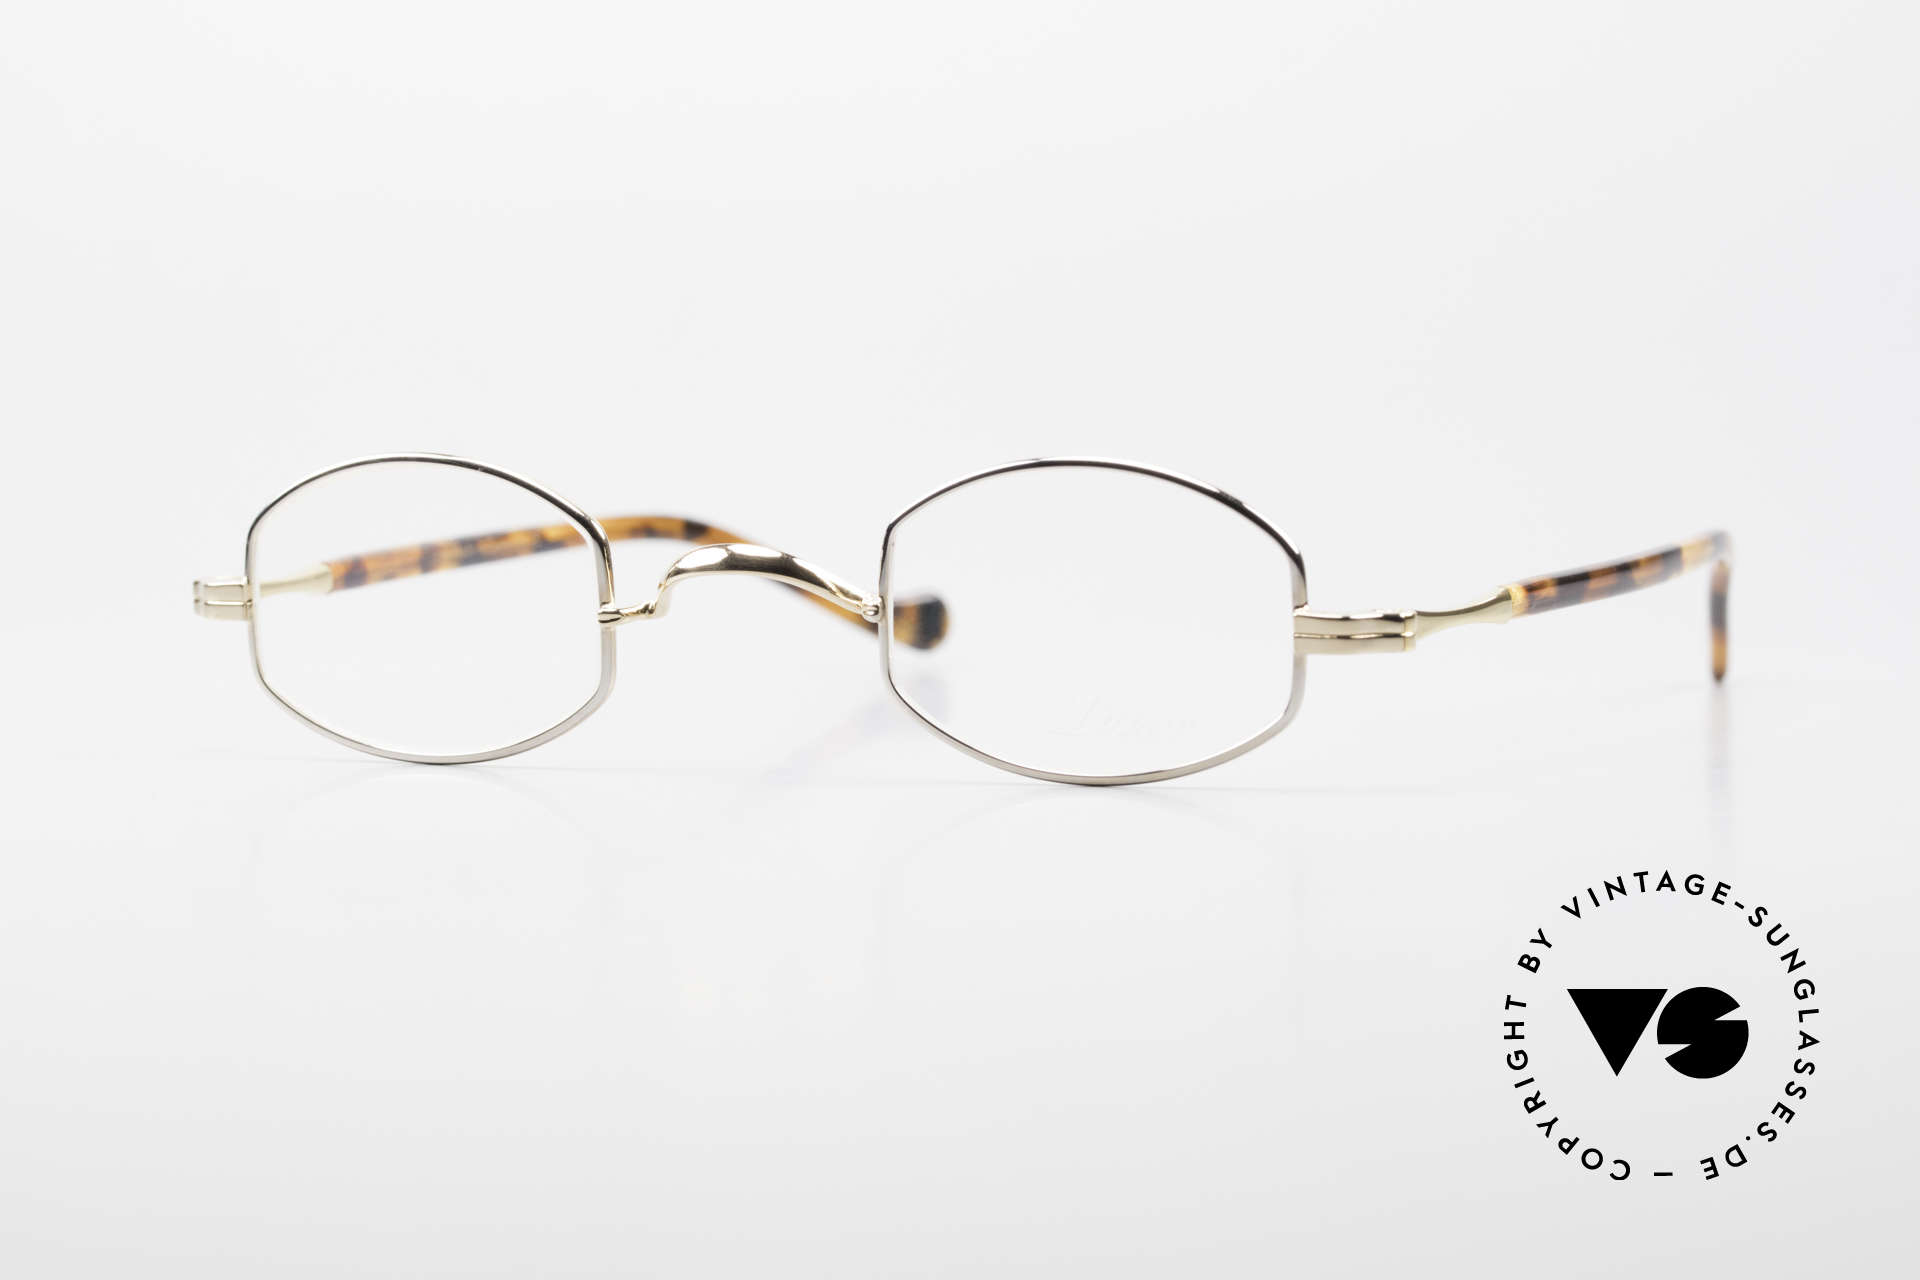 Lunor II A 02 Limited Edition BC Tortoise, very small Lunor glasses in a limited special edition, Made for Men and Women